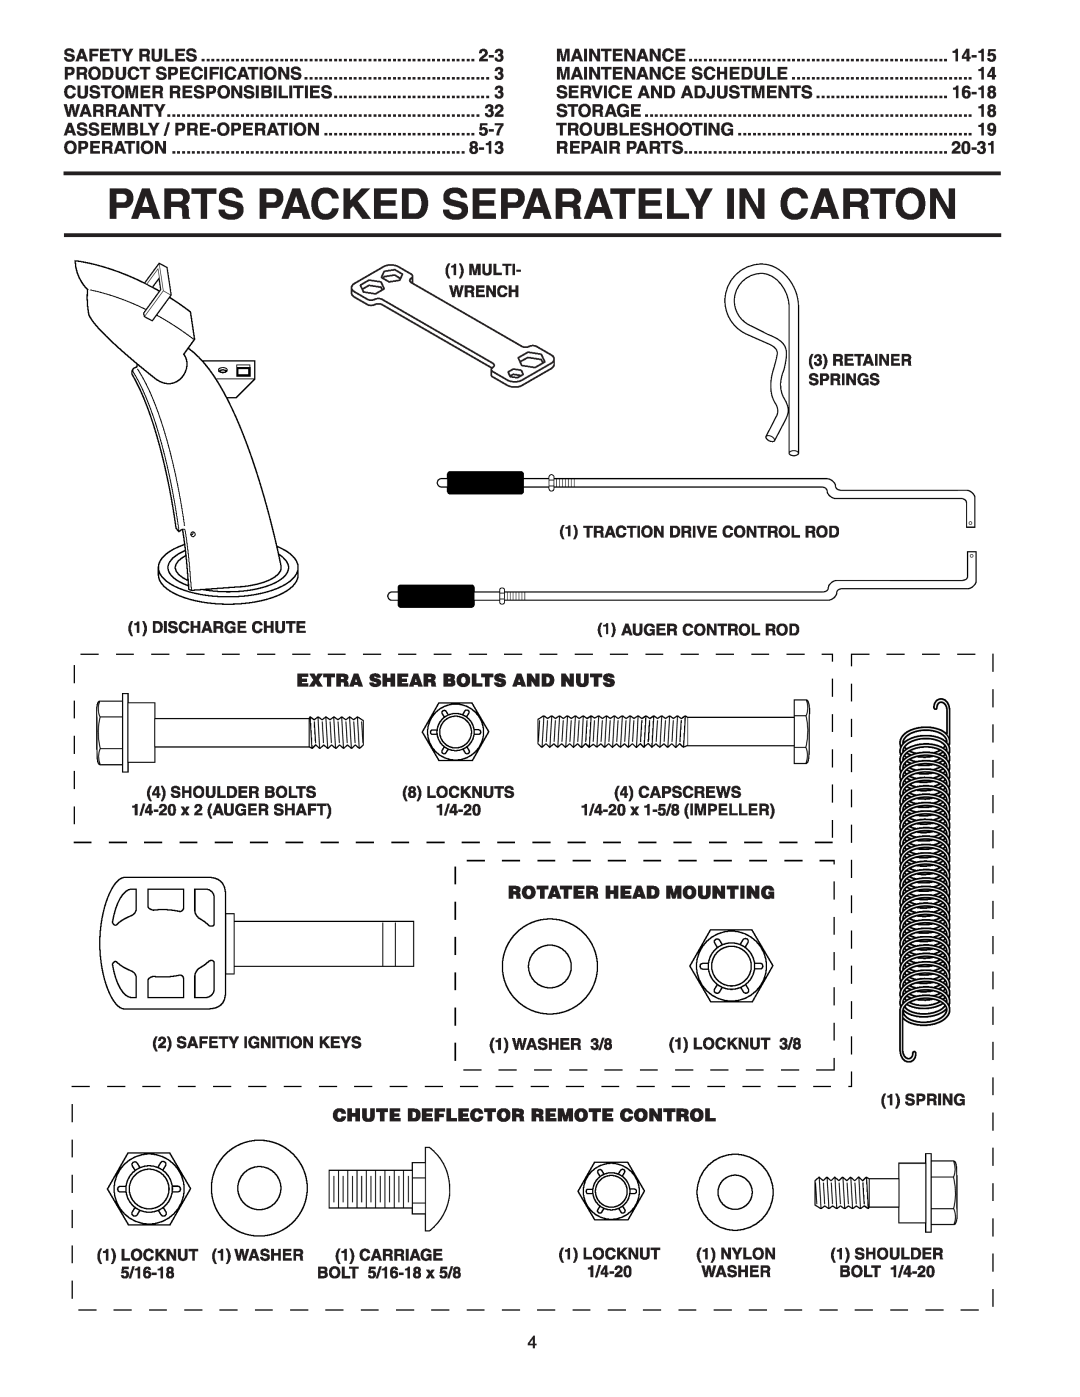 Poulan PP1130SB Parts Packed Separately In Carton, 8-13, 14-15, Service And Adjustments, 16-18, 20-31, Safety Rules 